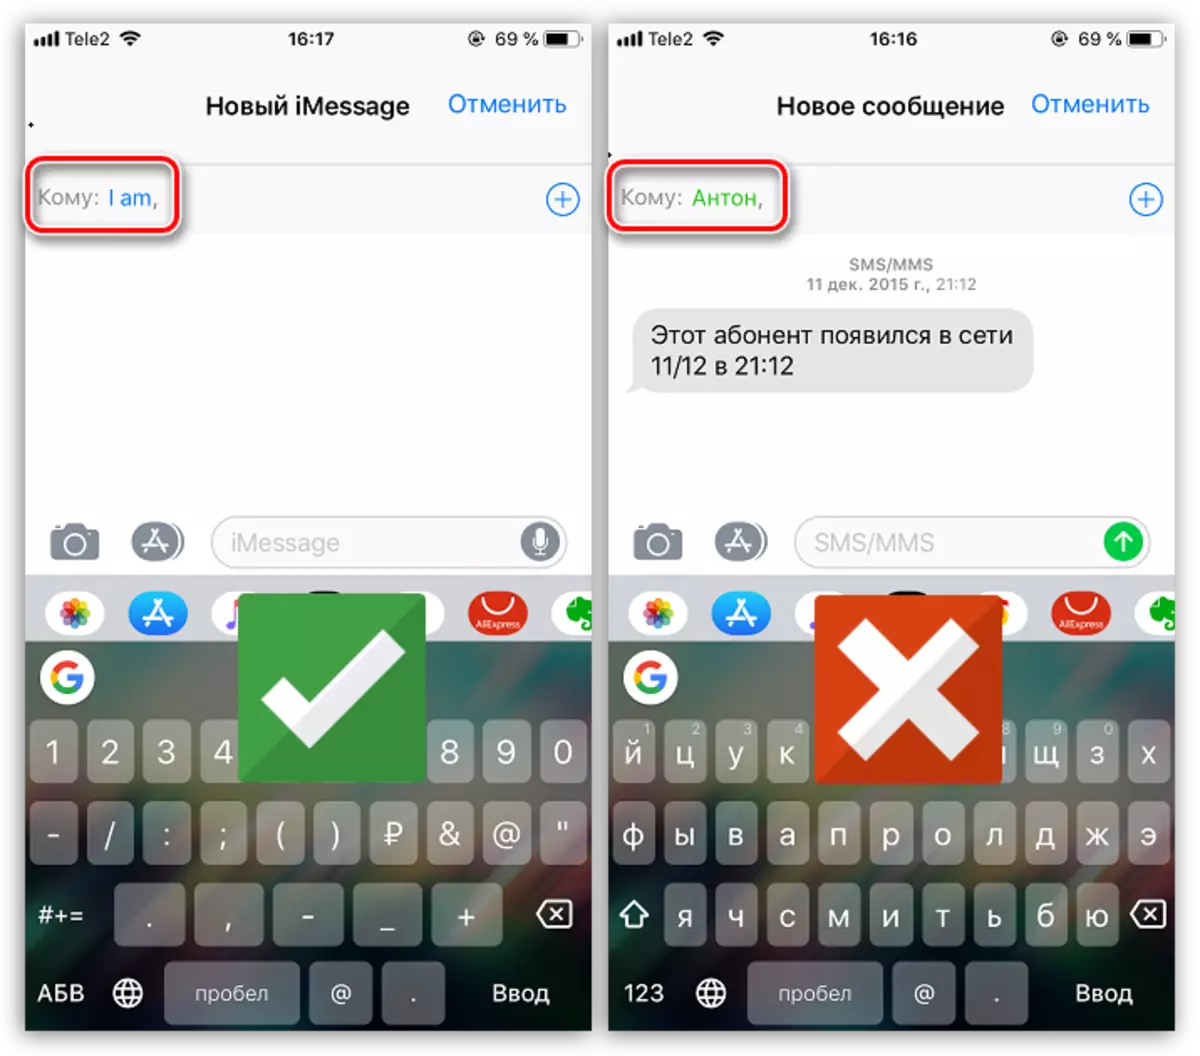 Verification of iMessage activity in iPhone messages